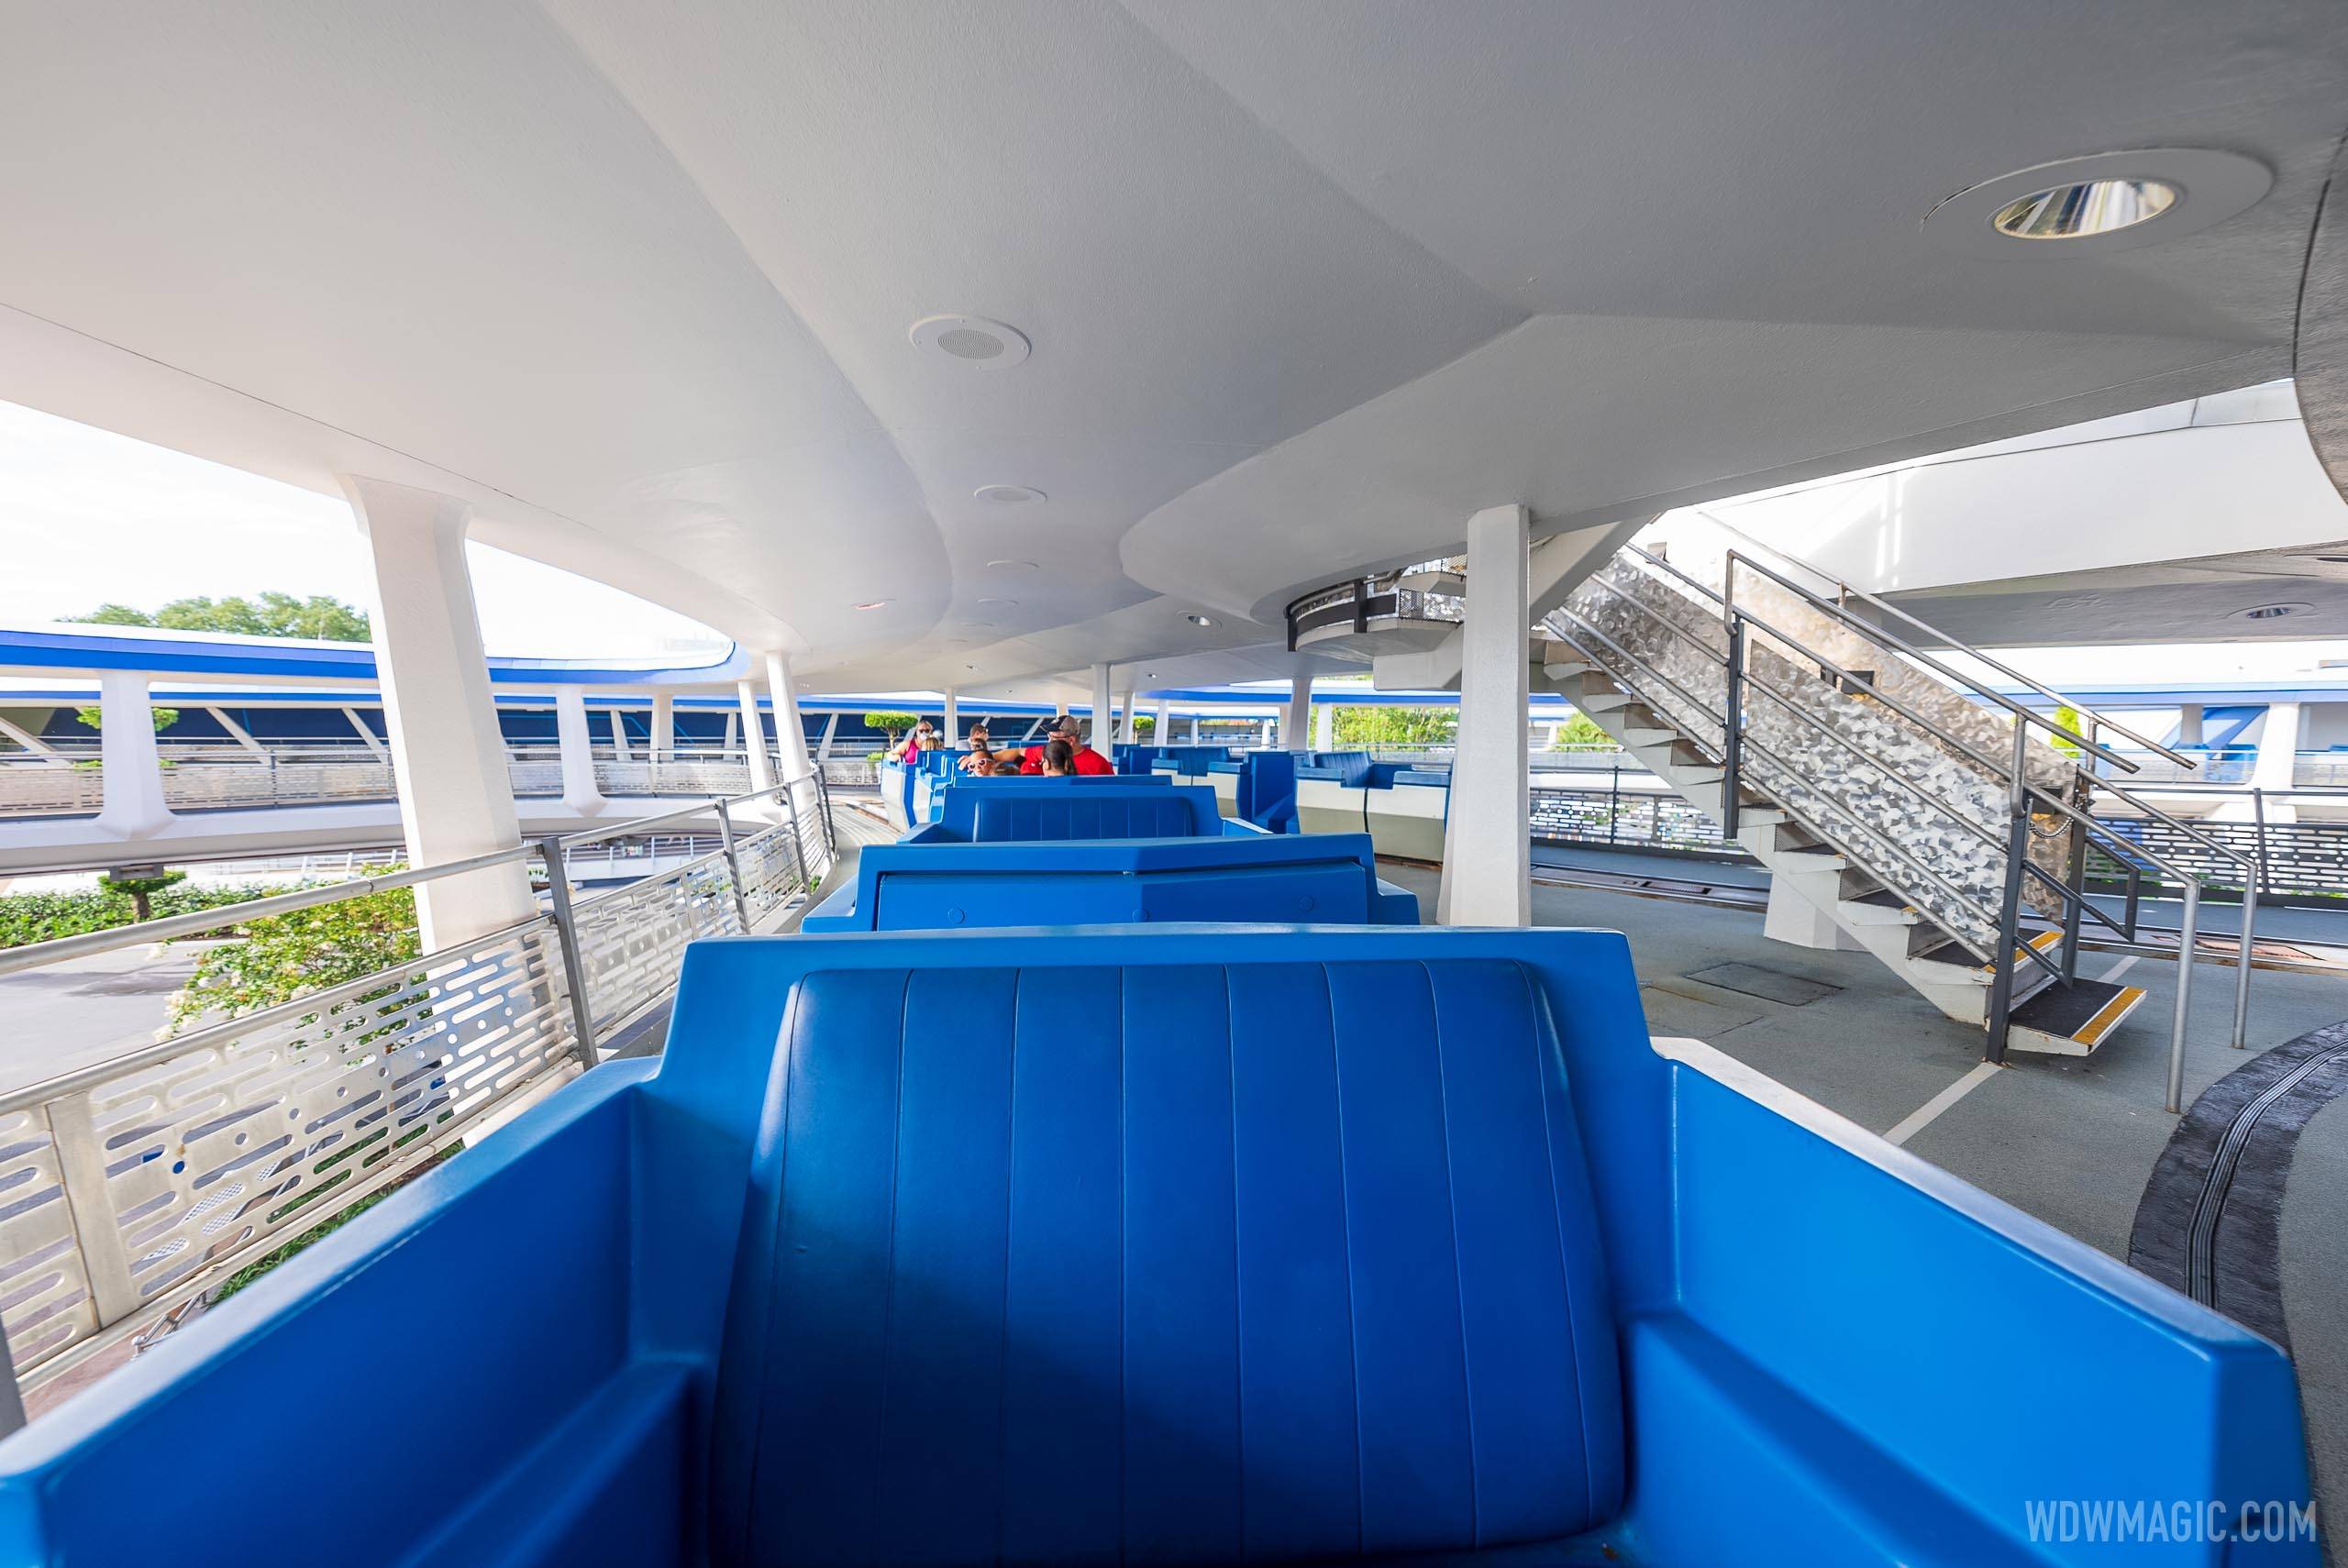 Postponed Tomorrowland Transit Authority PeopleMover refurbishment rescheduled for the summer